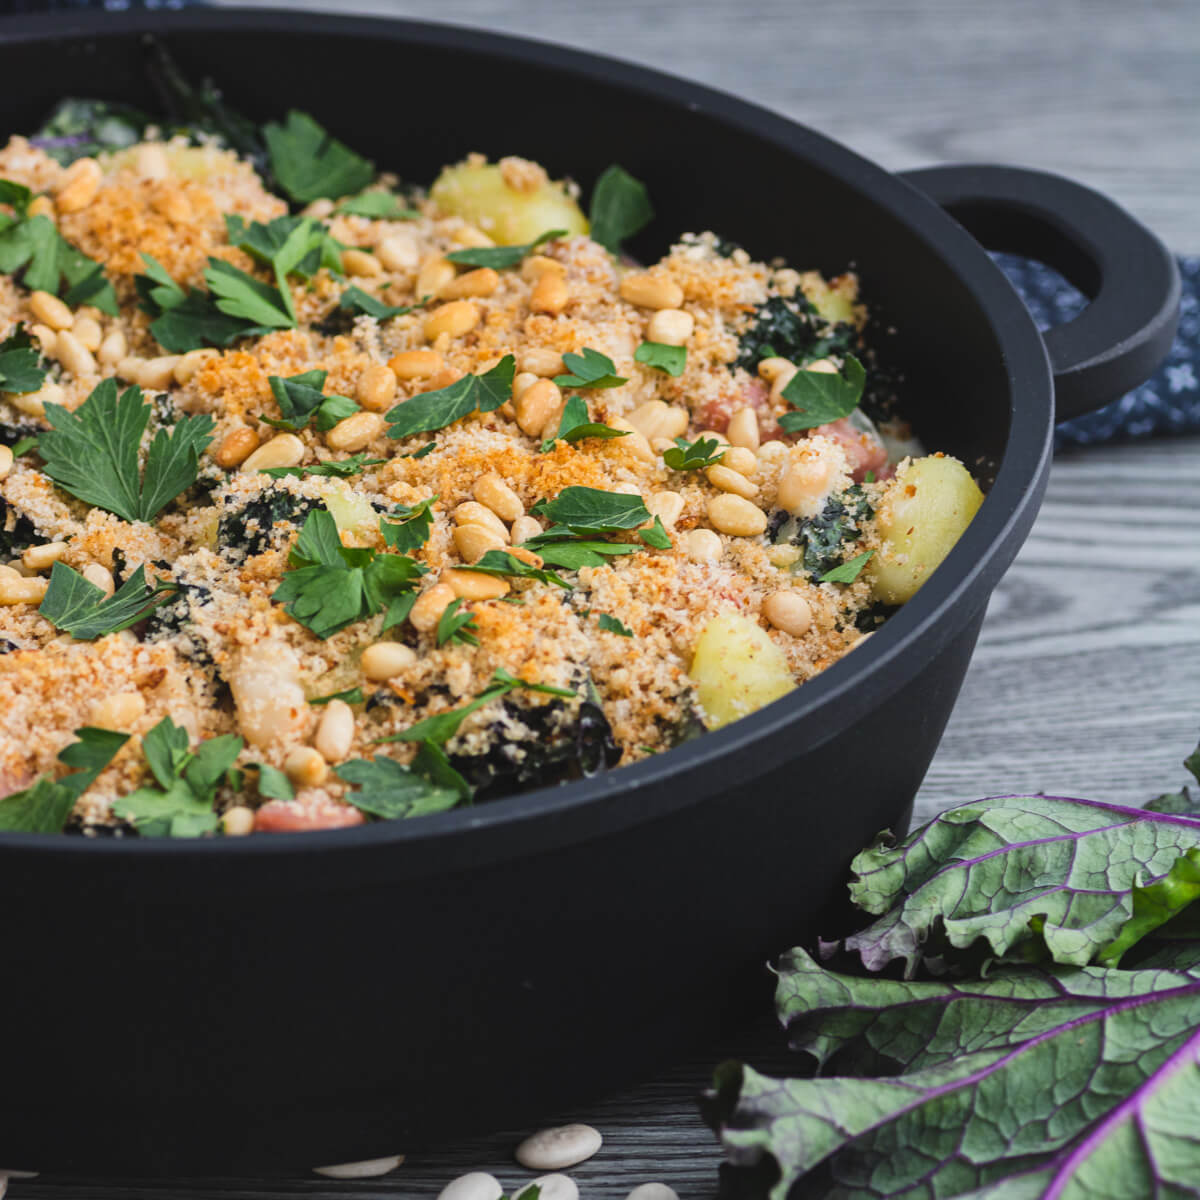 A baking dish full of Creamed Kale Gnocchi full of ham and beans in a creamy sauce topped with golden breadcrumbs and pine nuts.